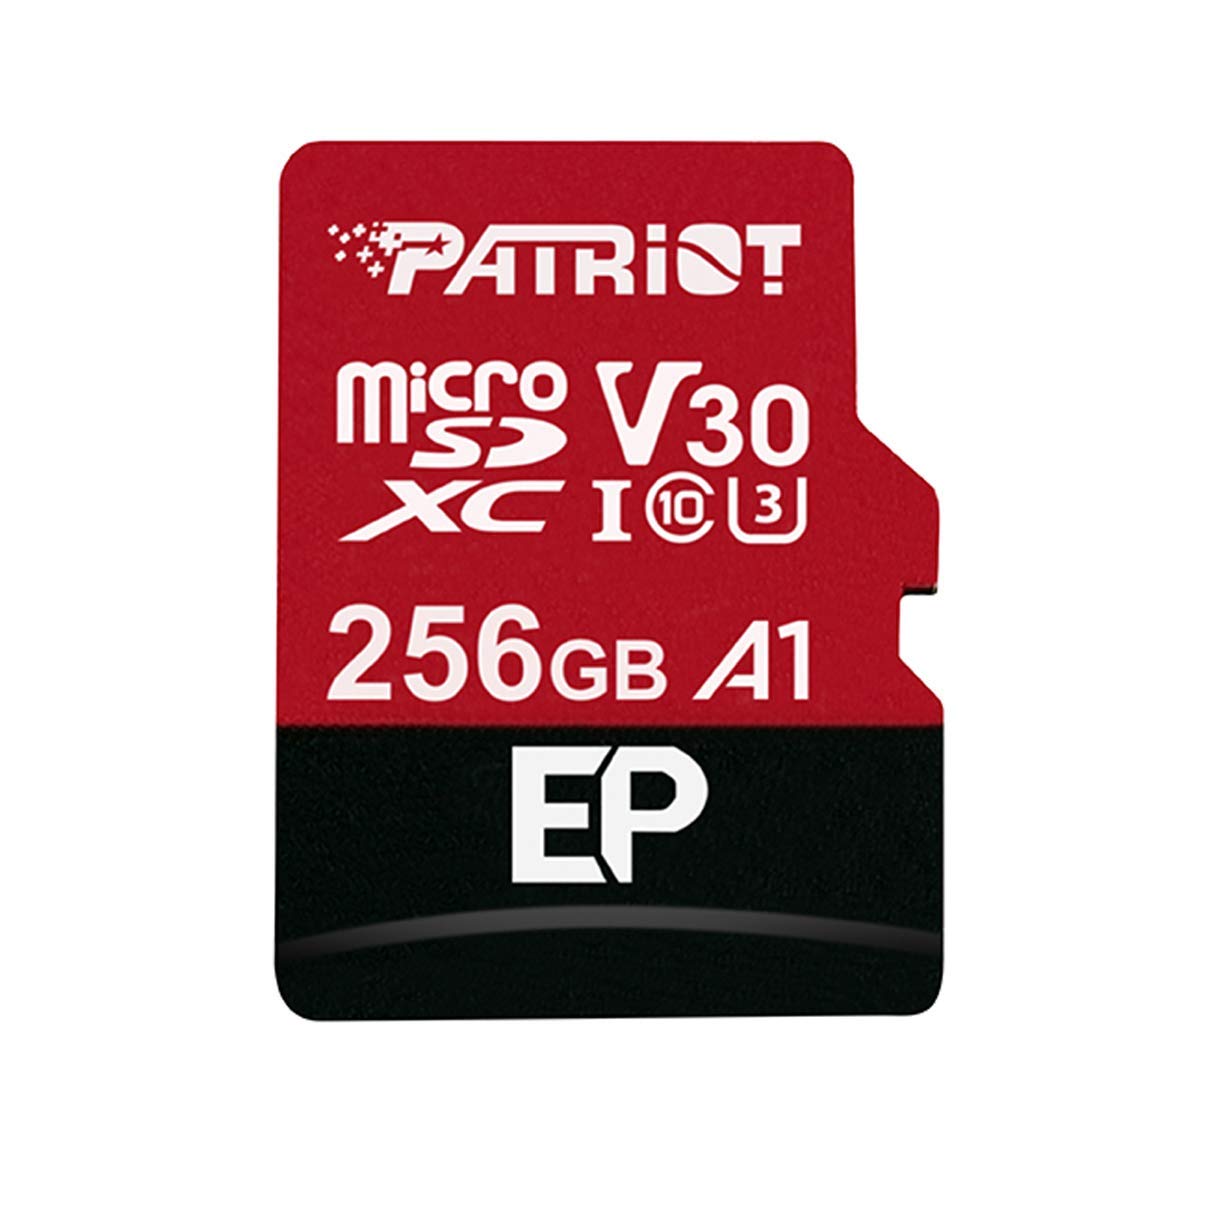 Patriot Memory A1 V30 MicroSD Memory Card 256GB Andriod Smartphones and Tablets Optimized Full HD & 4K PEF256GEP31MCX